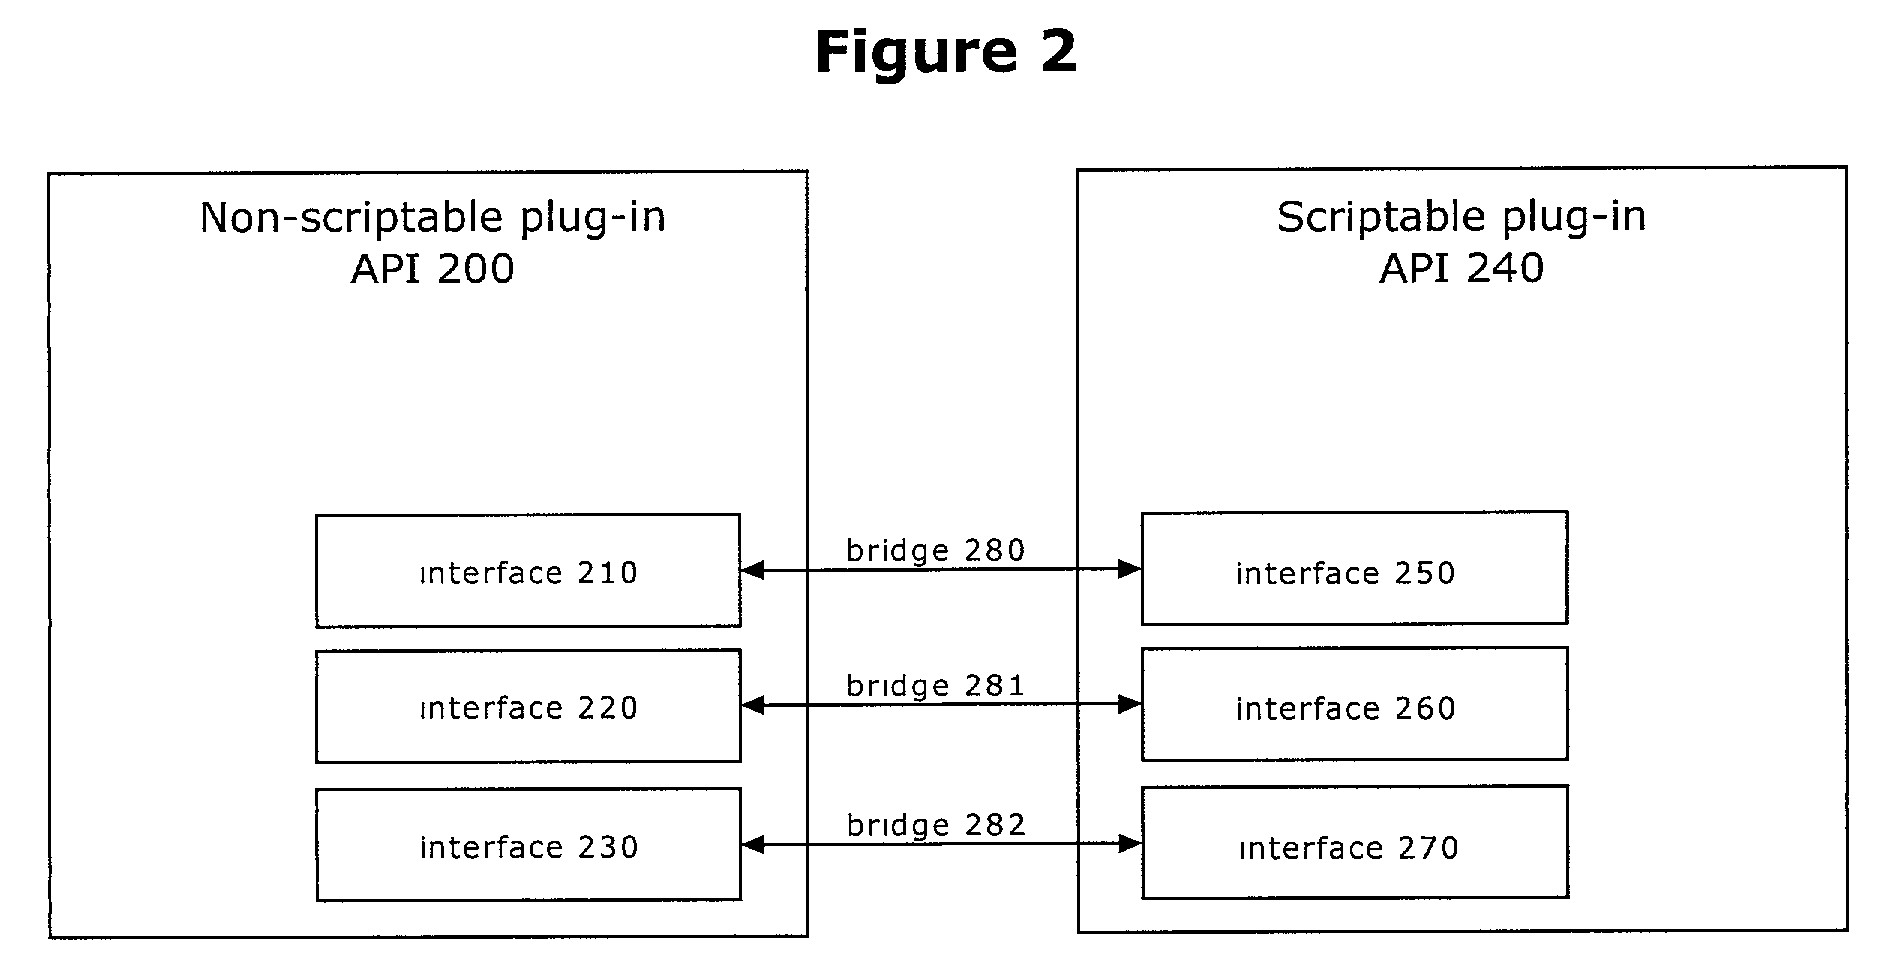 Scriptable plug-in application programming interface